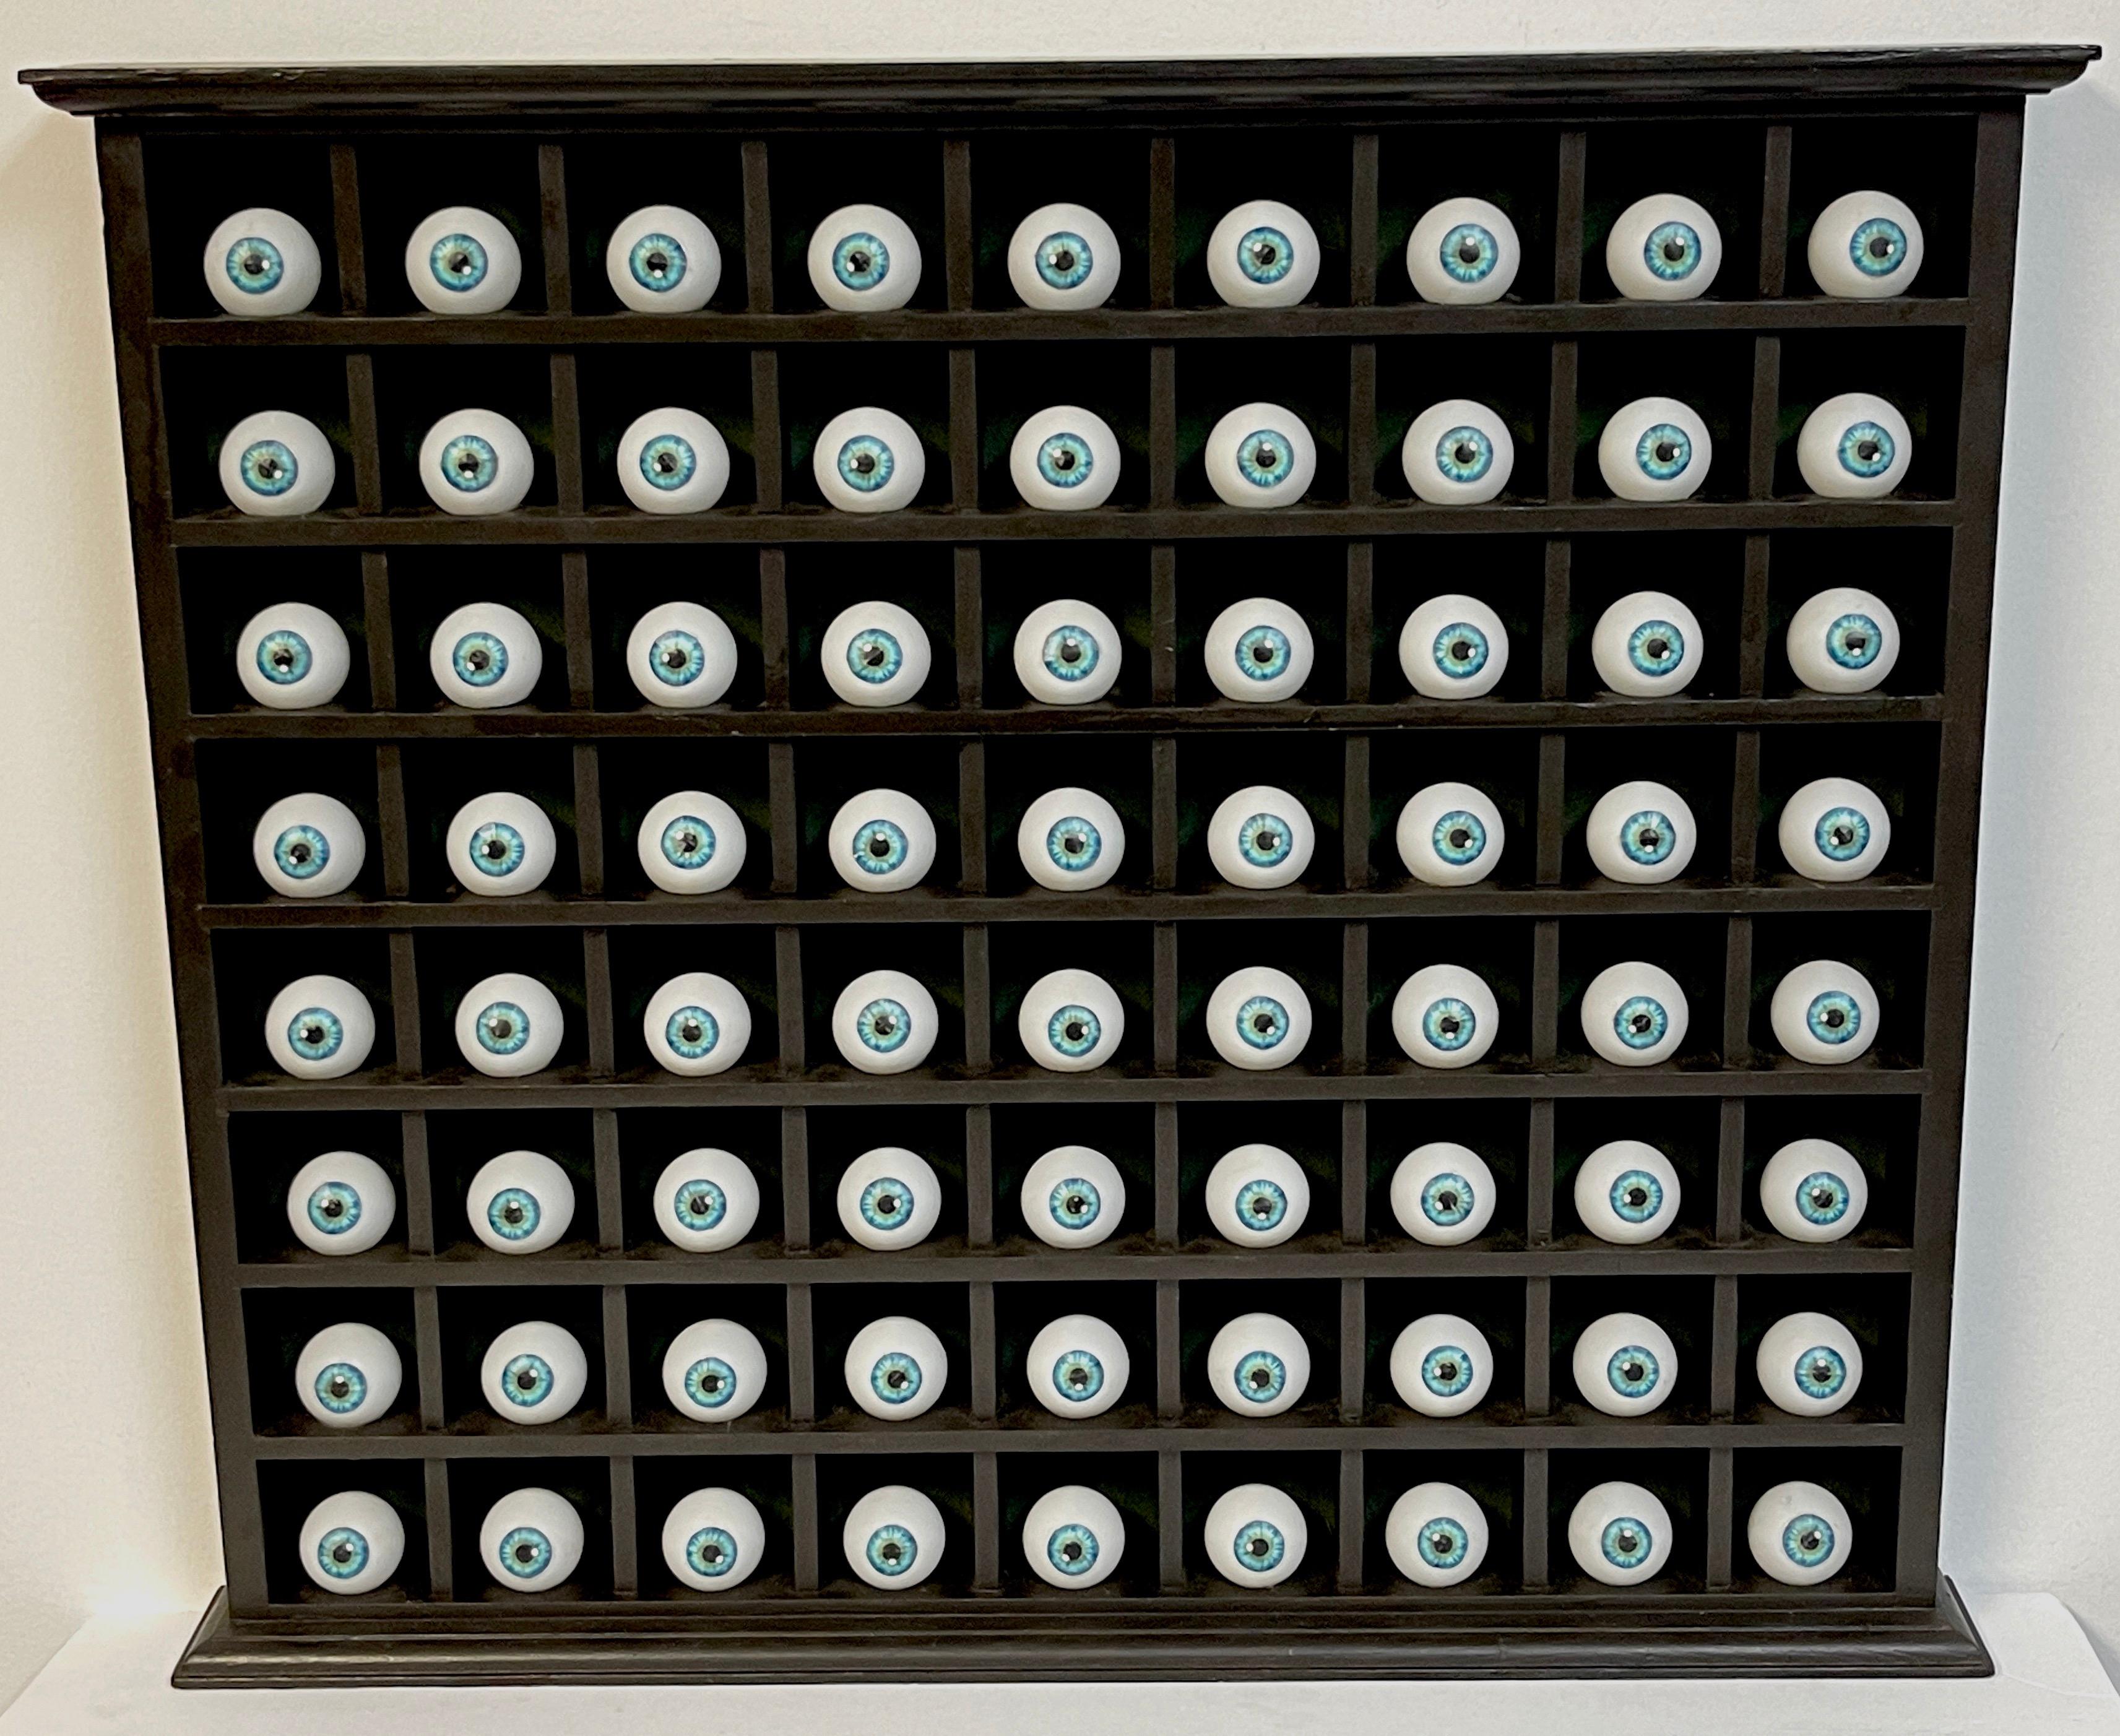 American modern outsider art wall sculpture '72 Blue Irises'

A unique wall sculpture of 72 Blue Irises, shelved. Unsigned
Presenting a symmetrical perspective of repetitive three dimensional ophthalmology related sculpture. 
Each individual